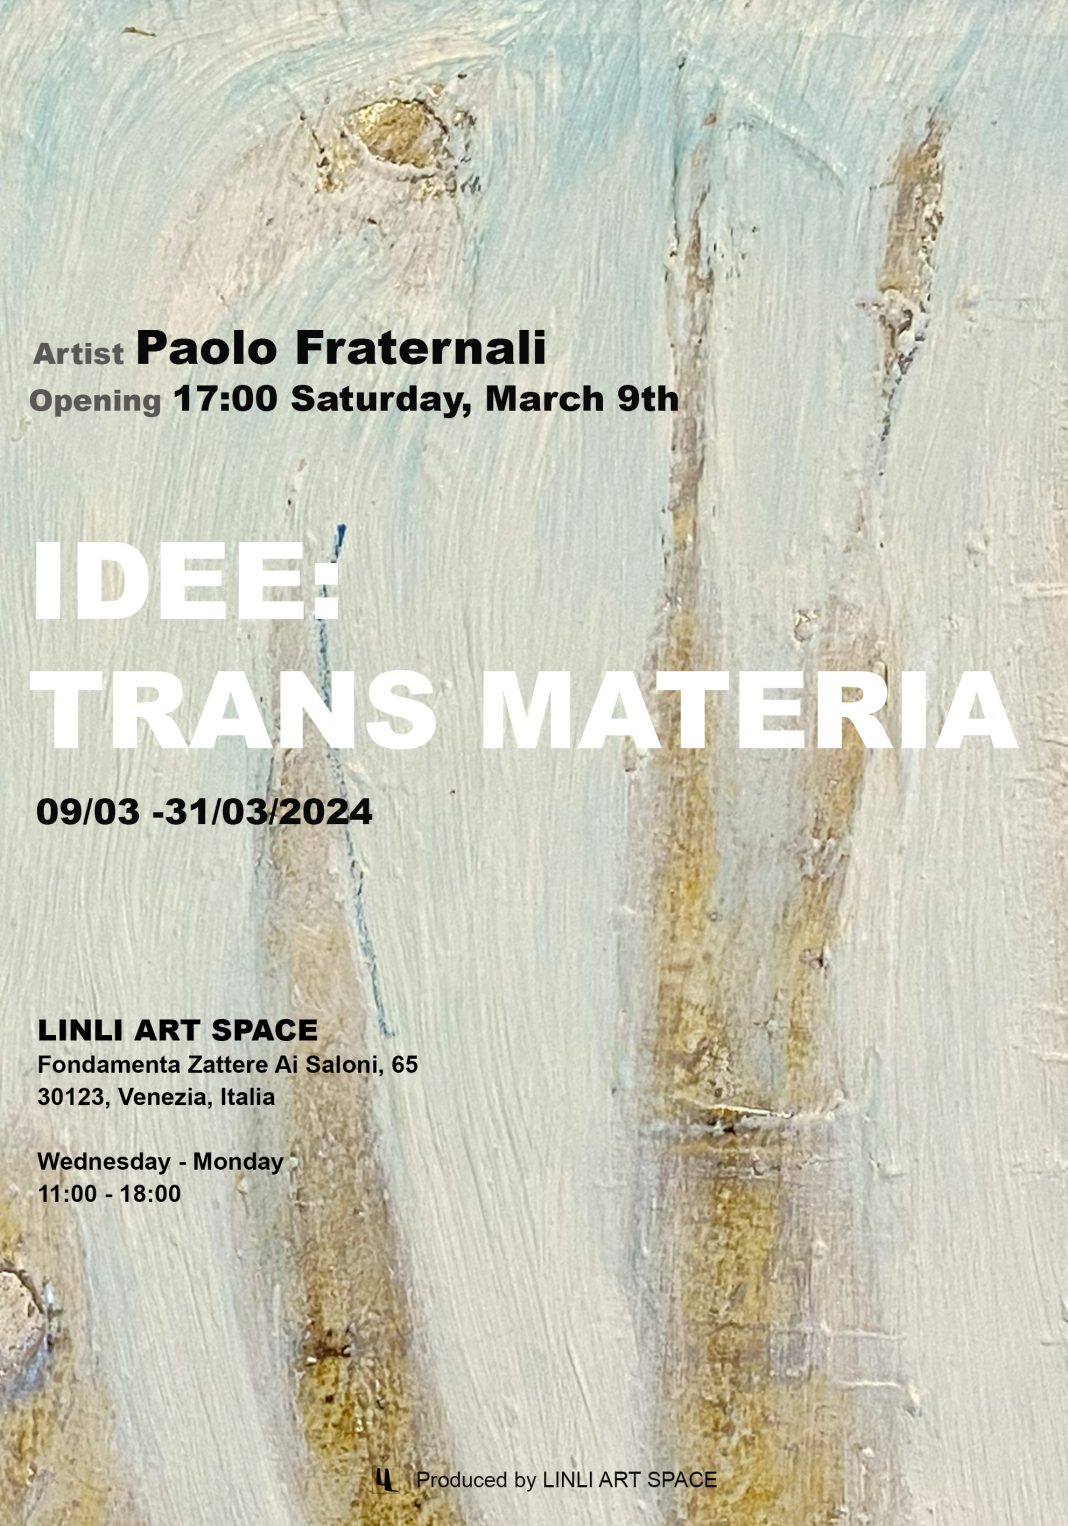 Paolo Fraternali – IDEE: TRANS MATERIAhttps://www.exibart.com/repository/media/formidable/11/img/bf3/paolo-2024年3月展览-1068x1526.jpg